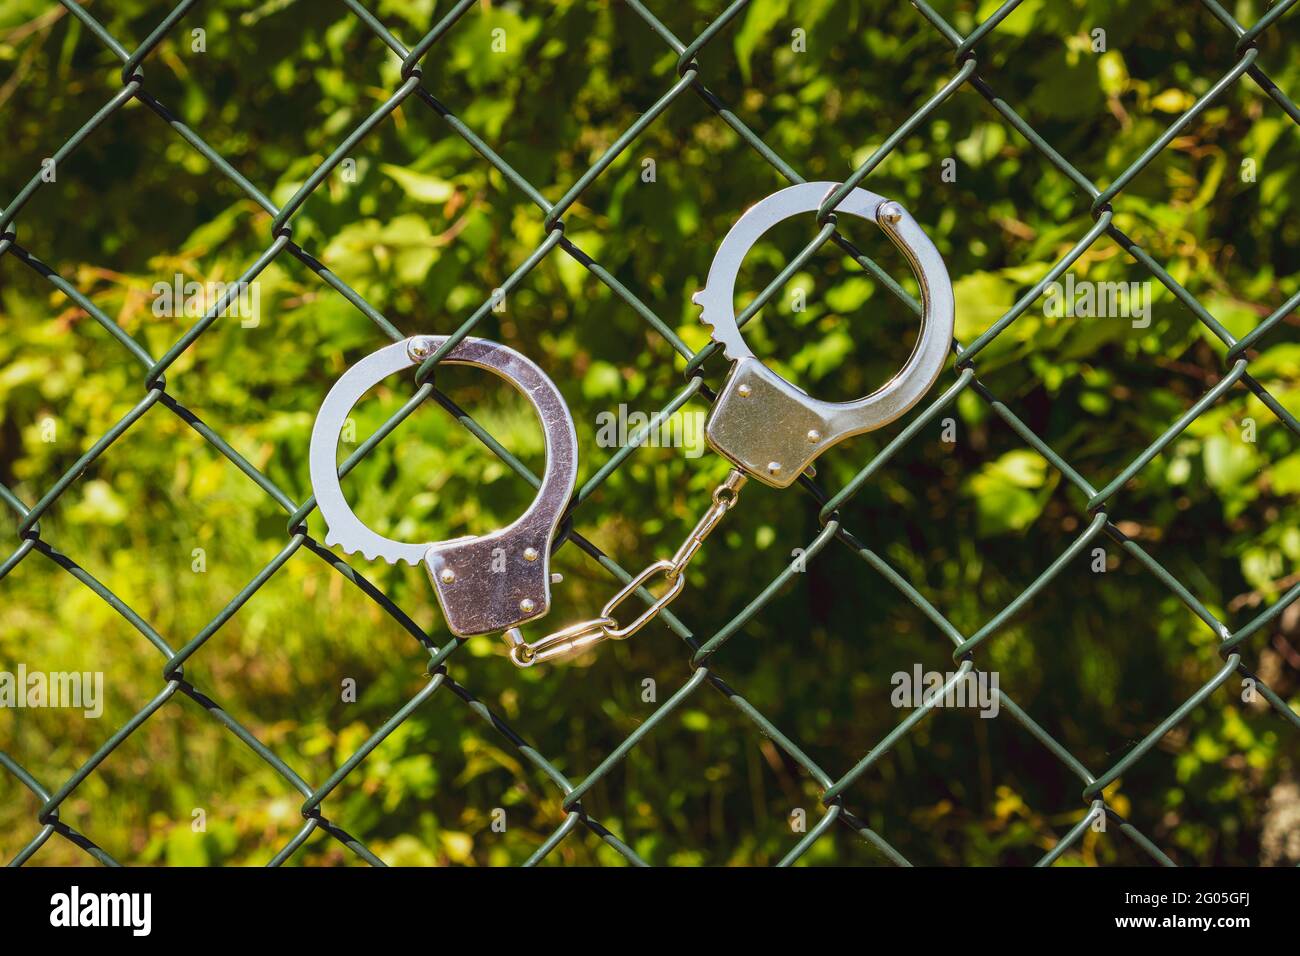 Handcuffs hanging on the metal fence with nature background Stock Photo